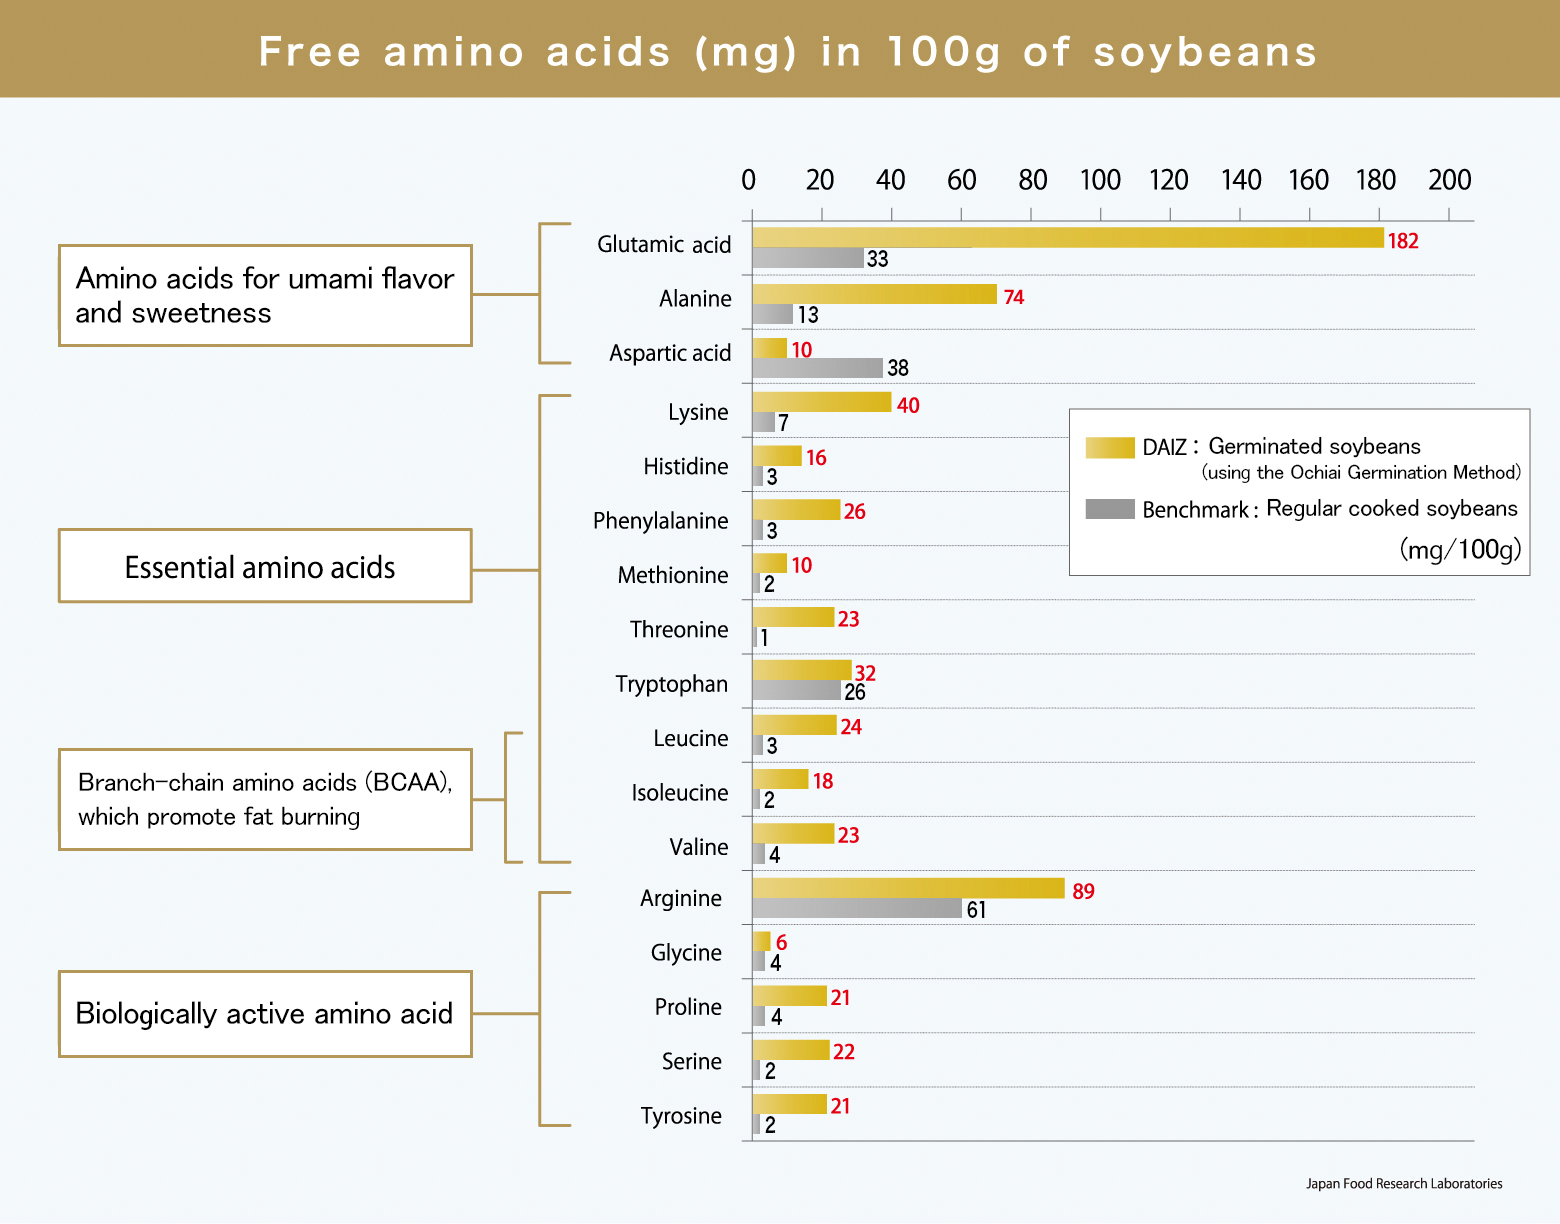 Free amino acids (mg) in 100g of soybeans